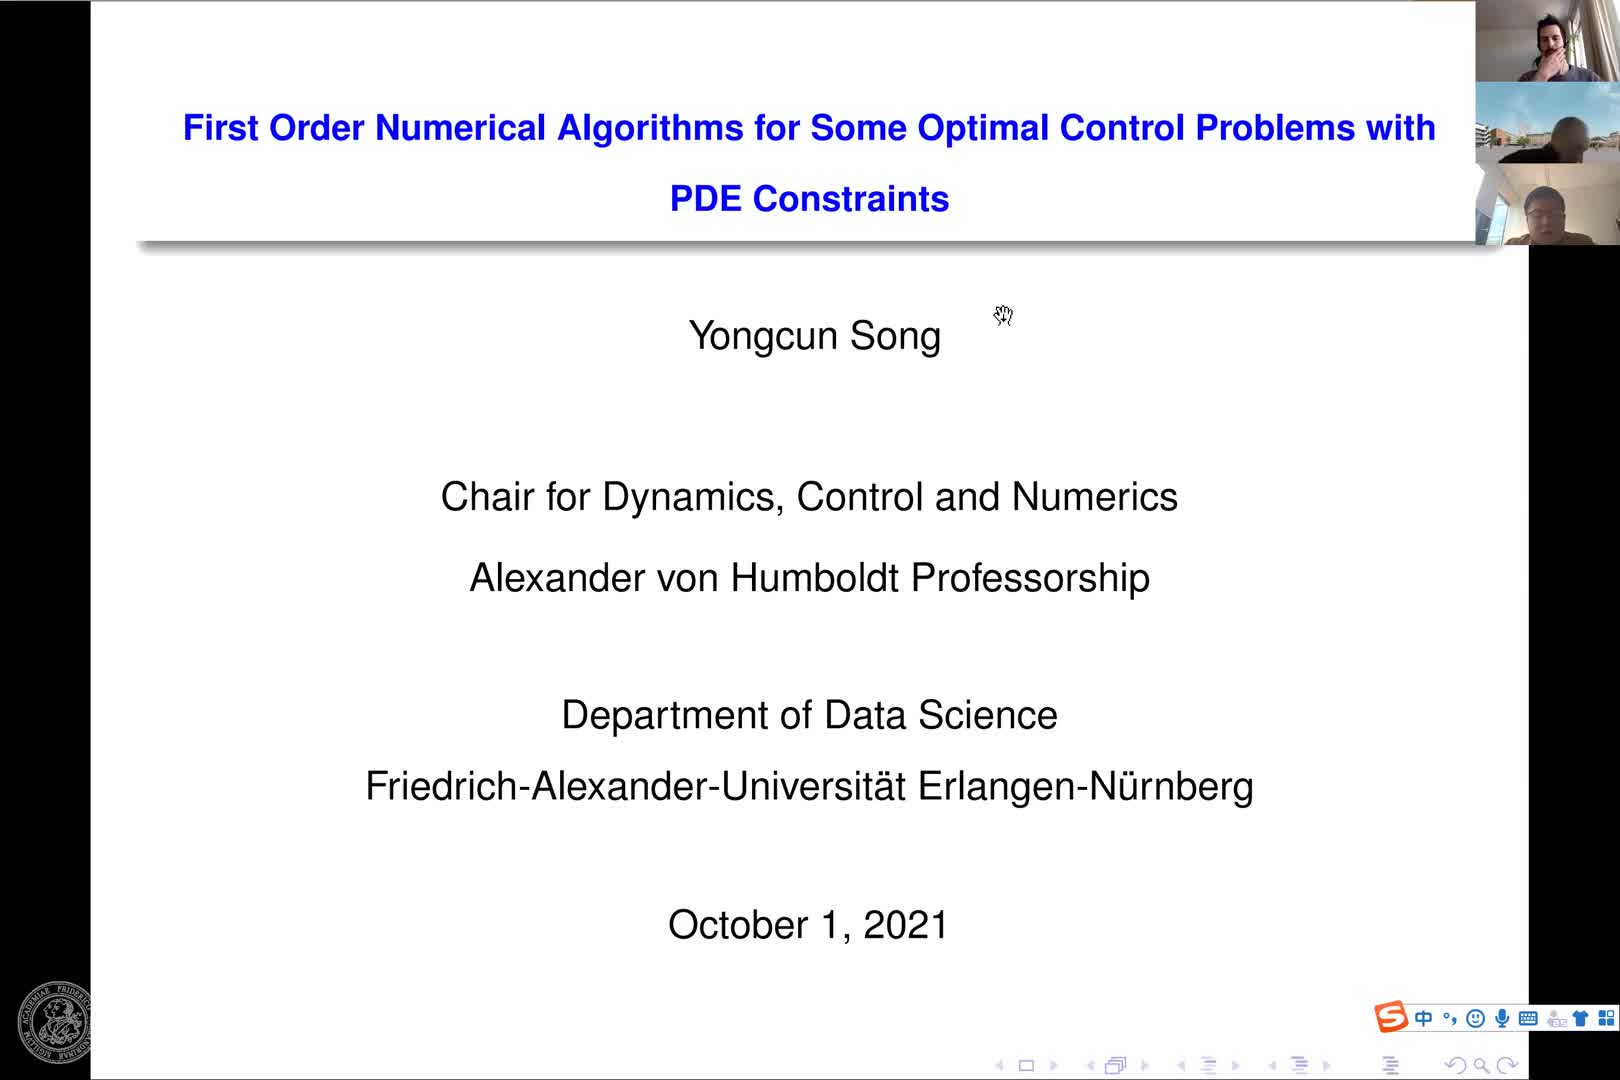 First order numerical algorithms for some optimal control problems with PDE constraints (Y. Song, FAU) preview image